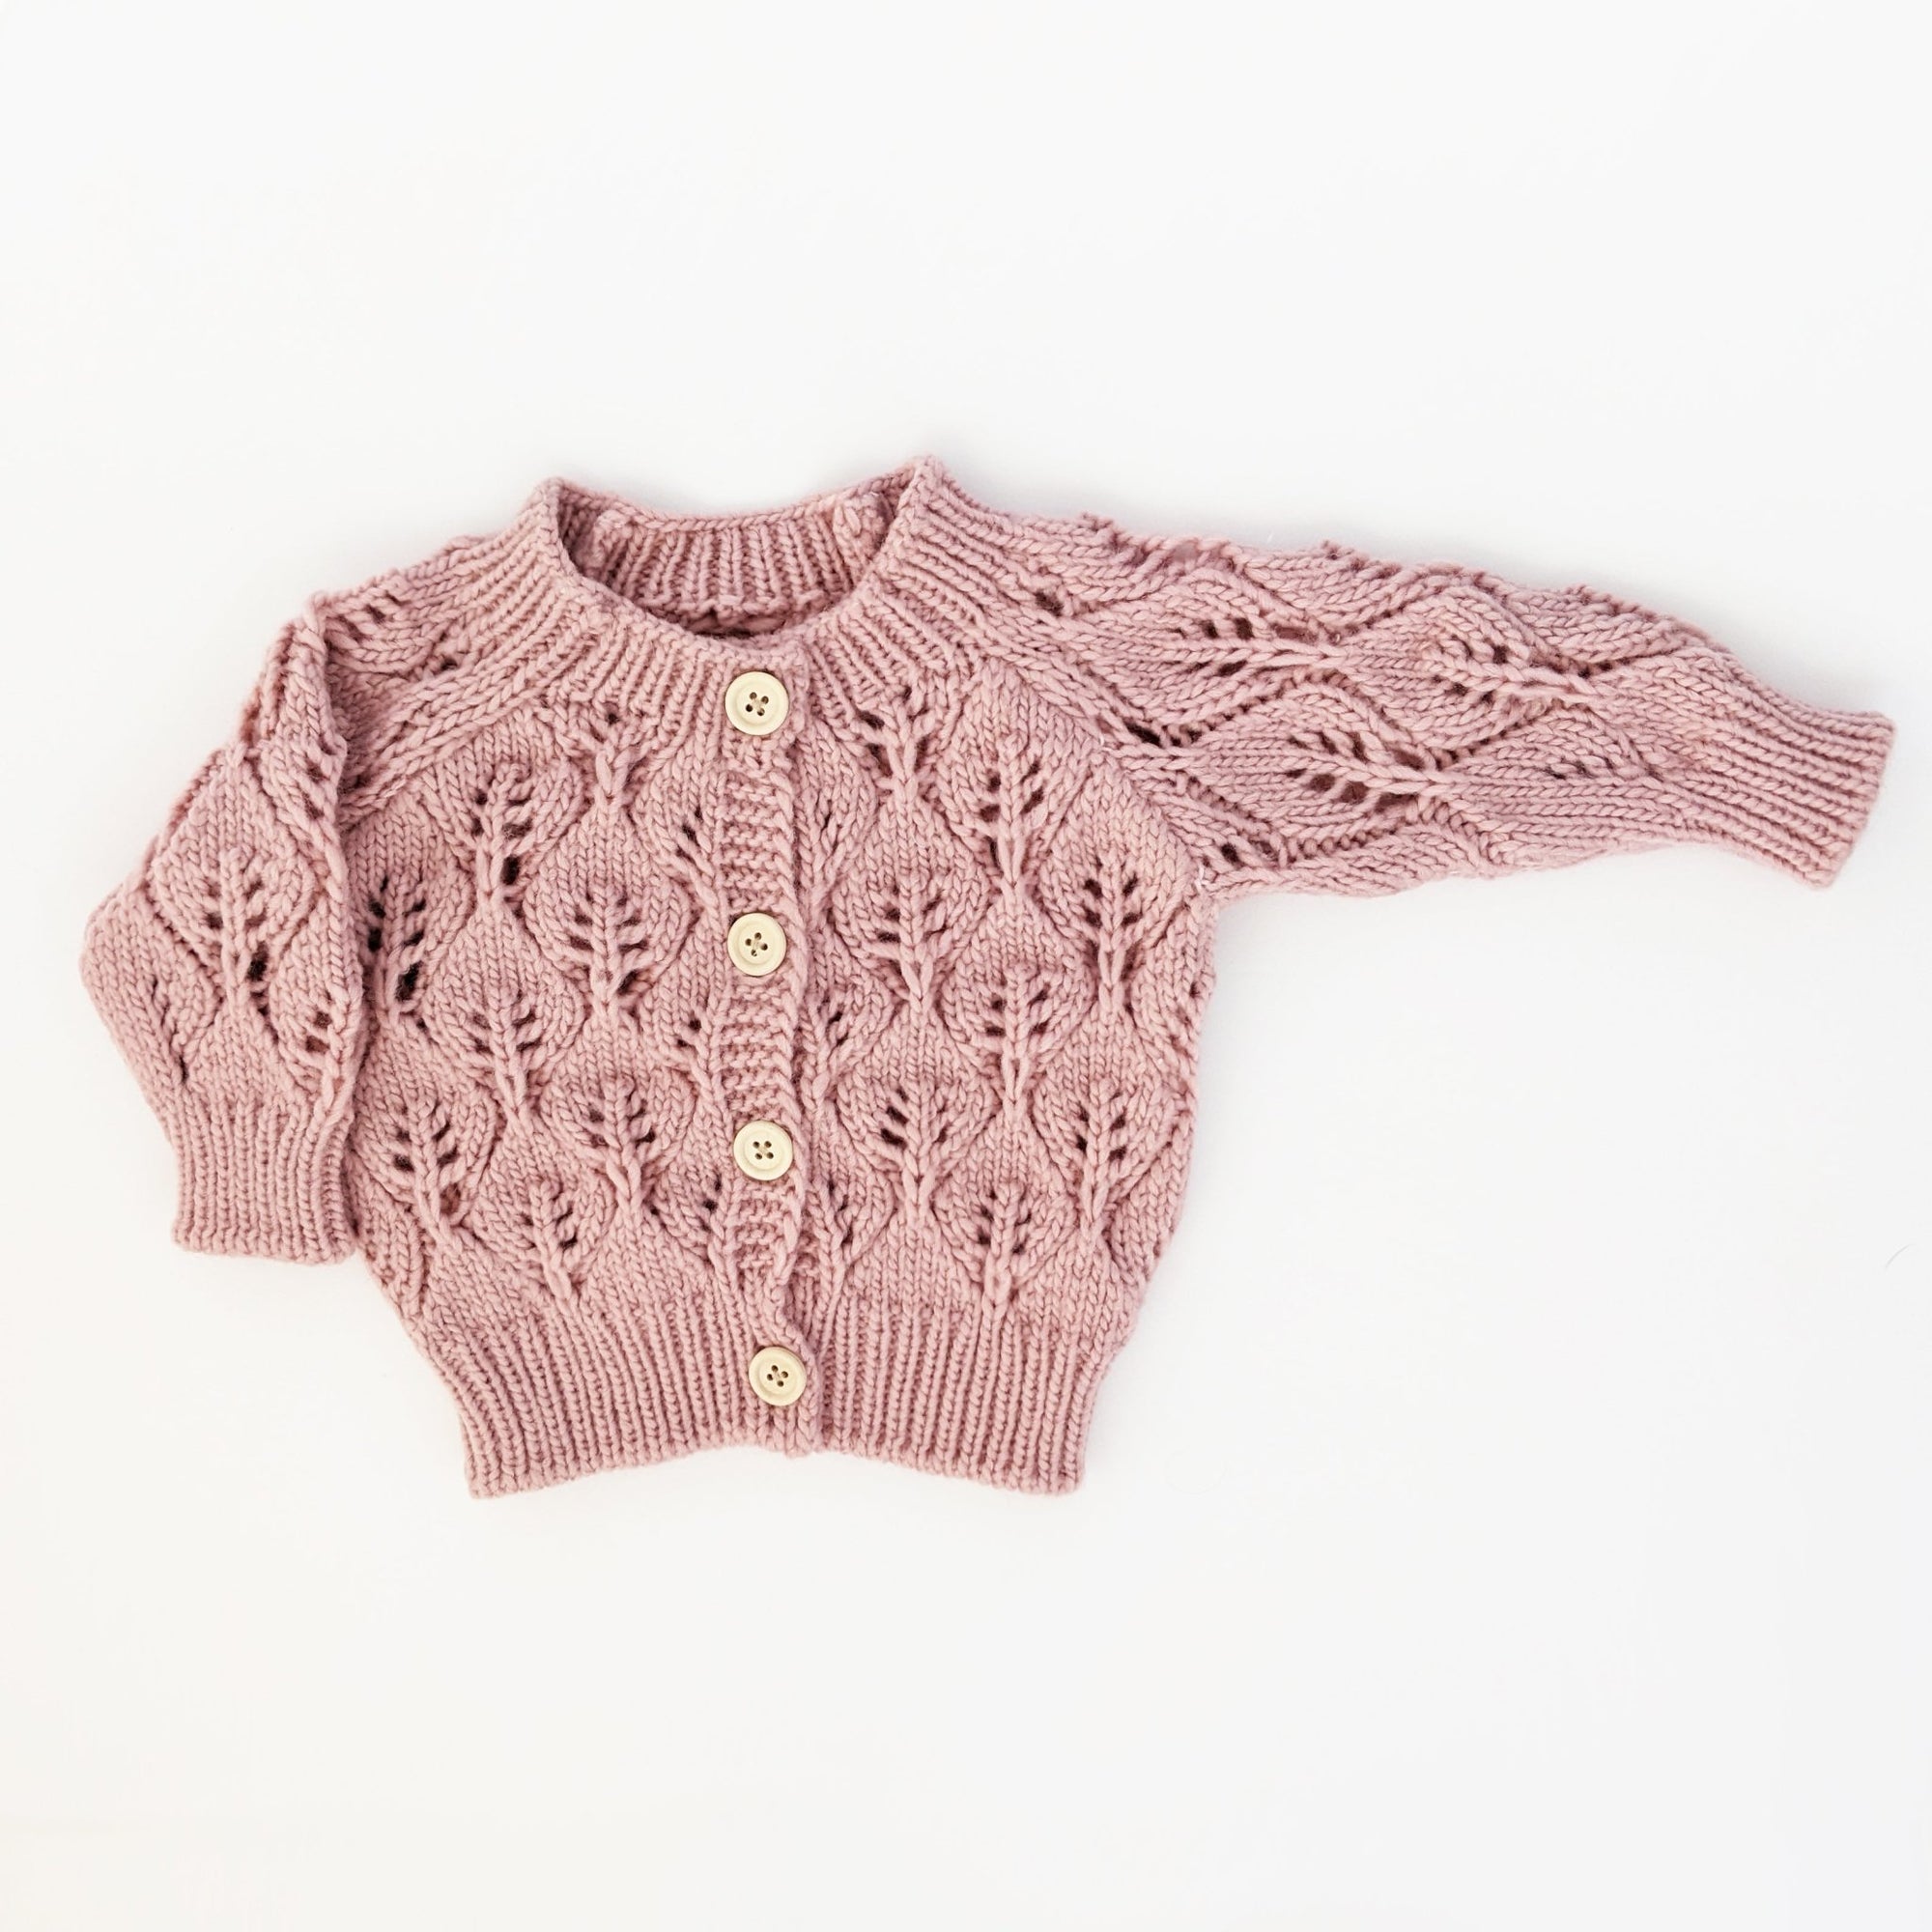 Leaf Lace Cardigan Sweater Rosy - Sweaters